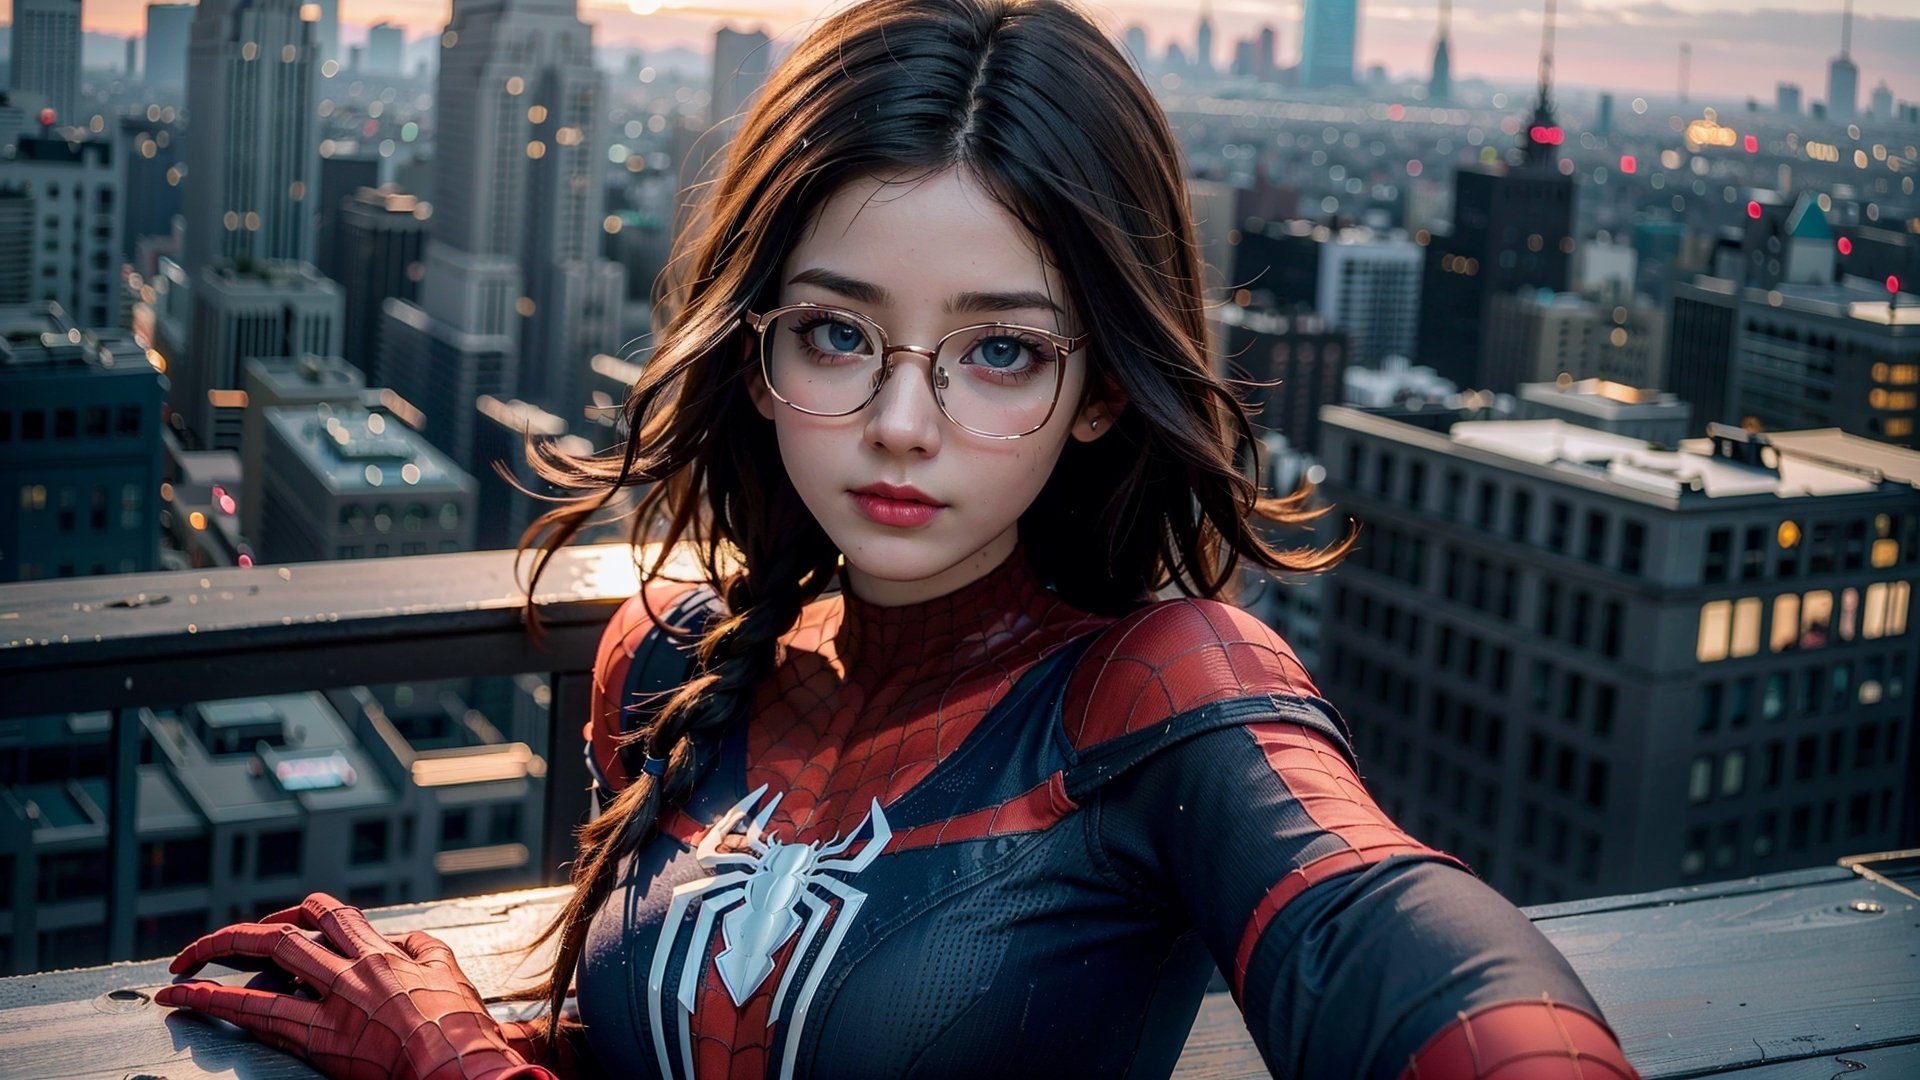 (masterpiece), best quality, high resolution, highly detailed, detailed background, perfect lighting,light blue eyes, medium breasts, The student council girl with glasses and twin braids on a rooftop in new york city,posing,ri.ggwp_1,dream_girl,beauty Asian,wet hair,Makeup,spider-man costume, on the rooftop in new york city at sunset, 35mm full frame, (((selfie)))